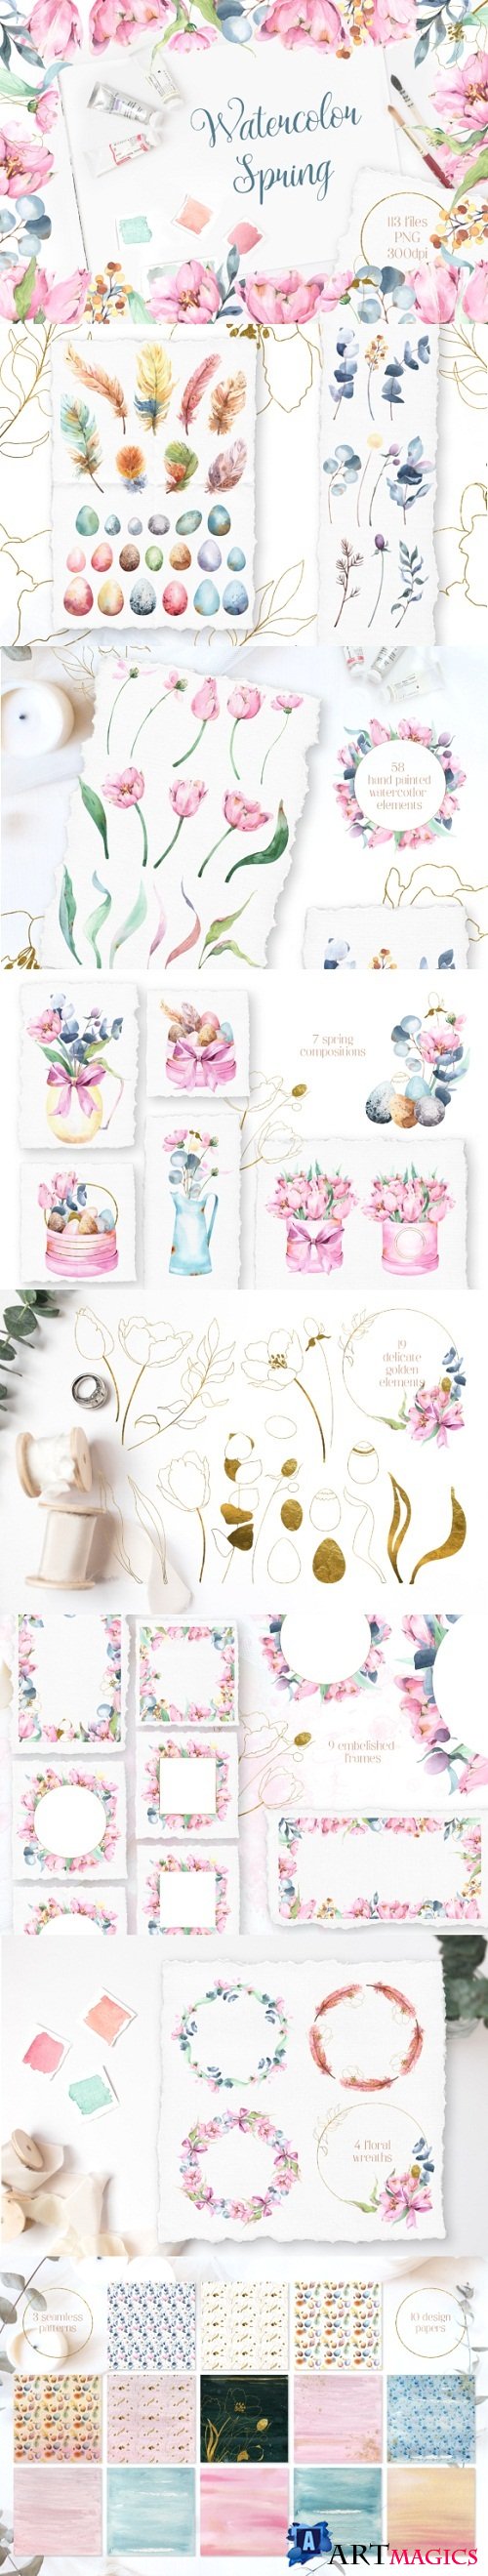 Watercolor Spring floral collection